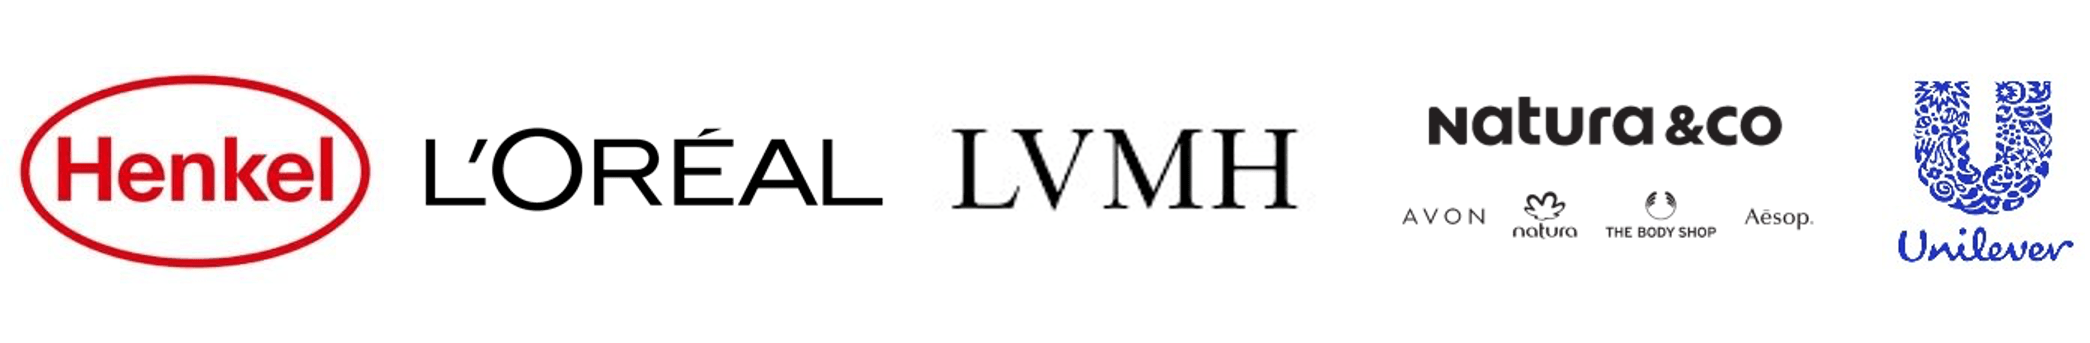 LVMH and Dow intend to collaborate to improve sustainable packaging across  major perfume and cosmetics brands - Sustainable Packaging News